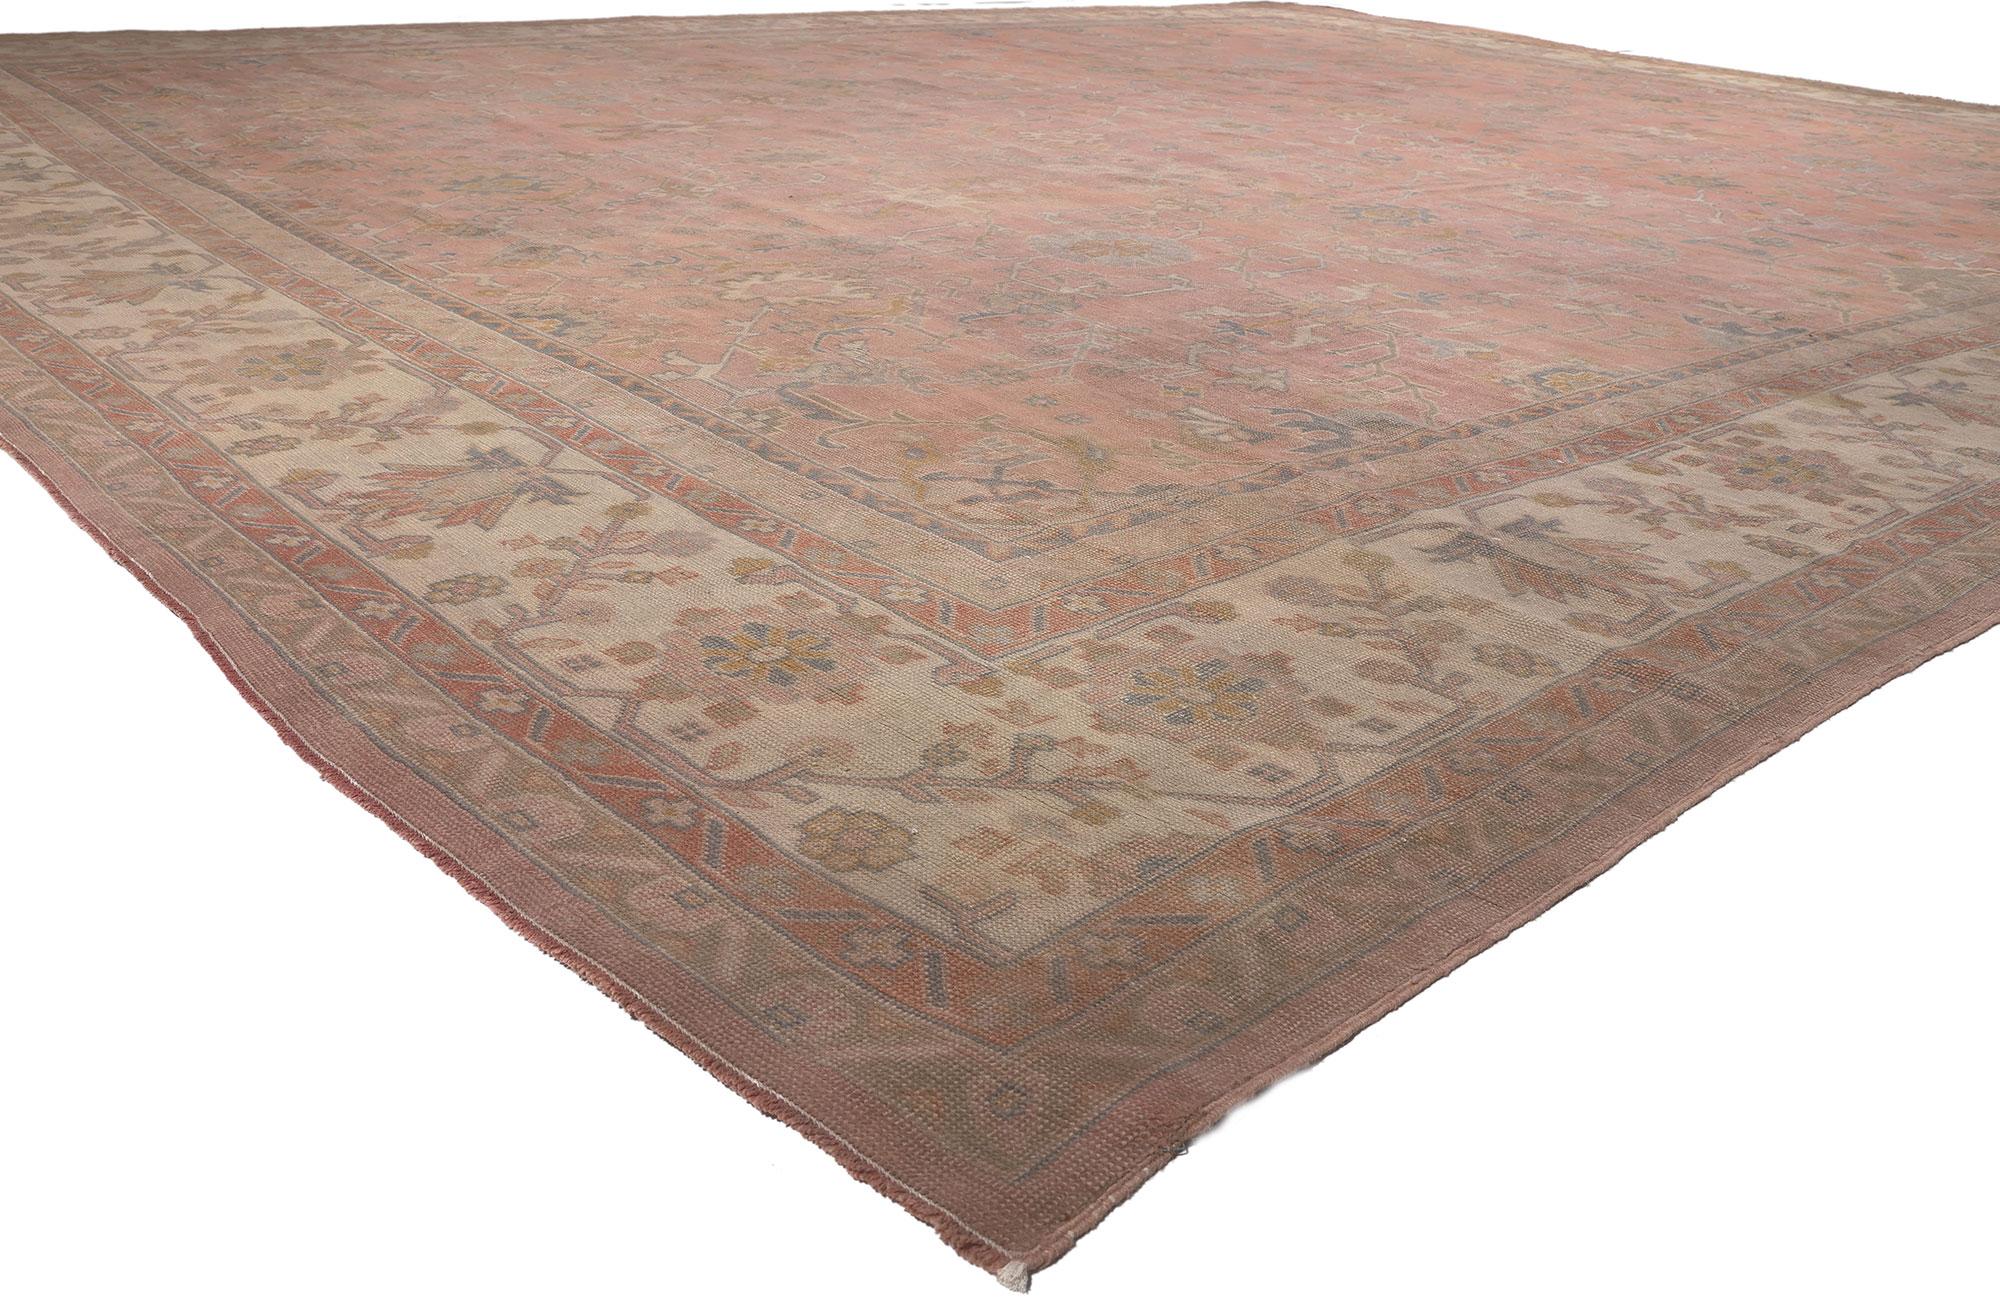 77746 Oversized Antique Turkish Oushak Rug, 16'00 x 19'01. 
Softer yet no less striking, this oversized antique Turkish Oushak rug marries romantic style with unmistakable Anatolian imagery to create a truly unique piece. The angular botanical